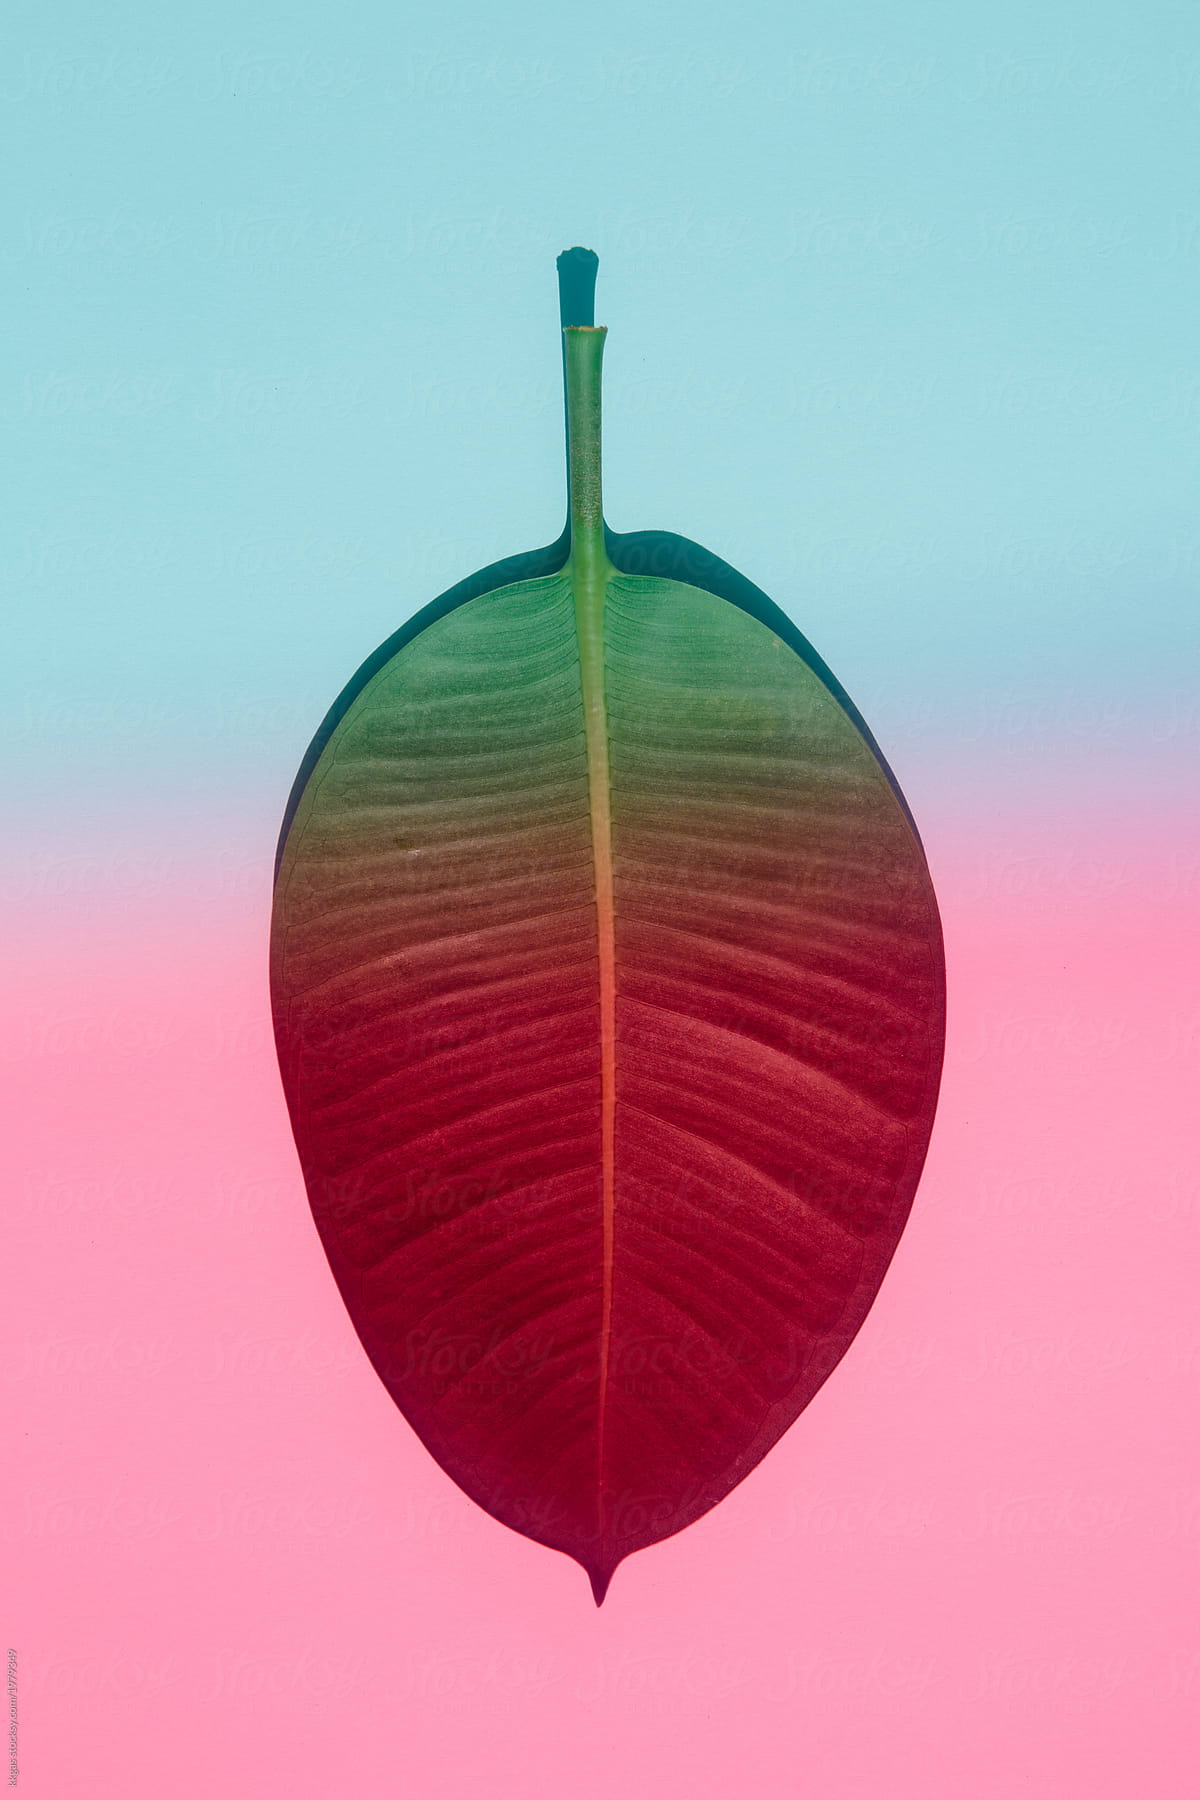 Large leaf with blue and pink lighting